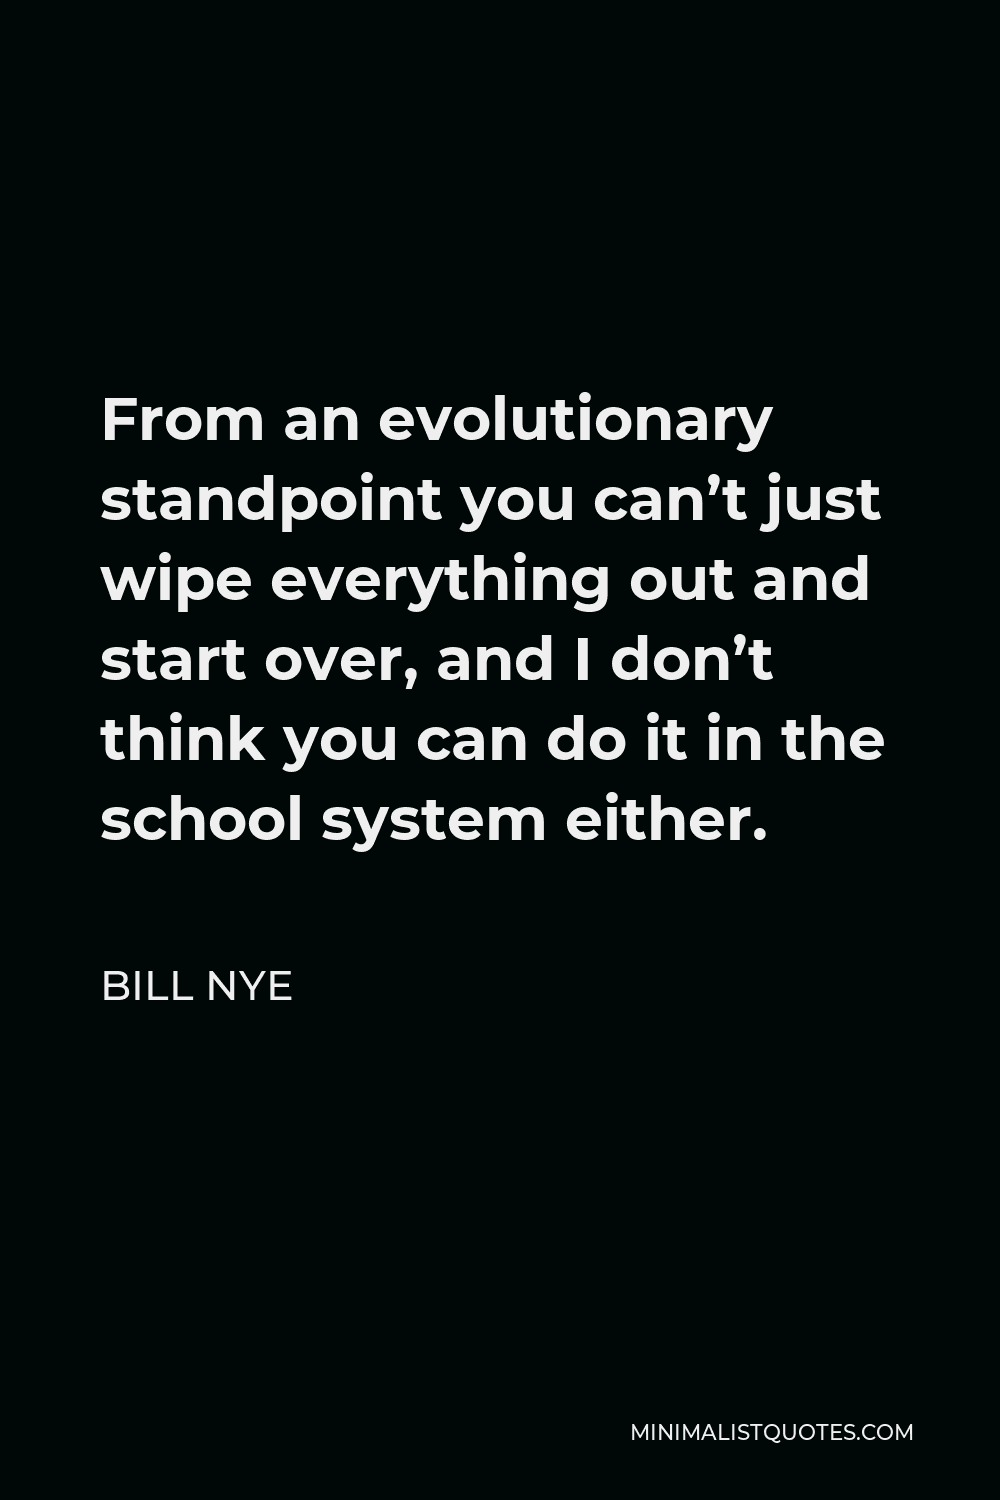 Bill Nye Quote - From an evolutionary standpoint you can’t just wipe everything out and start over, and I don’t think you can do it in the school system either.